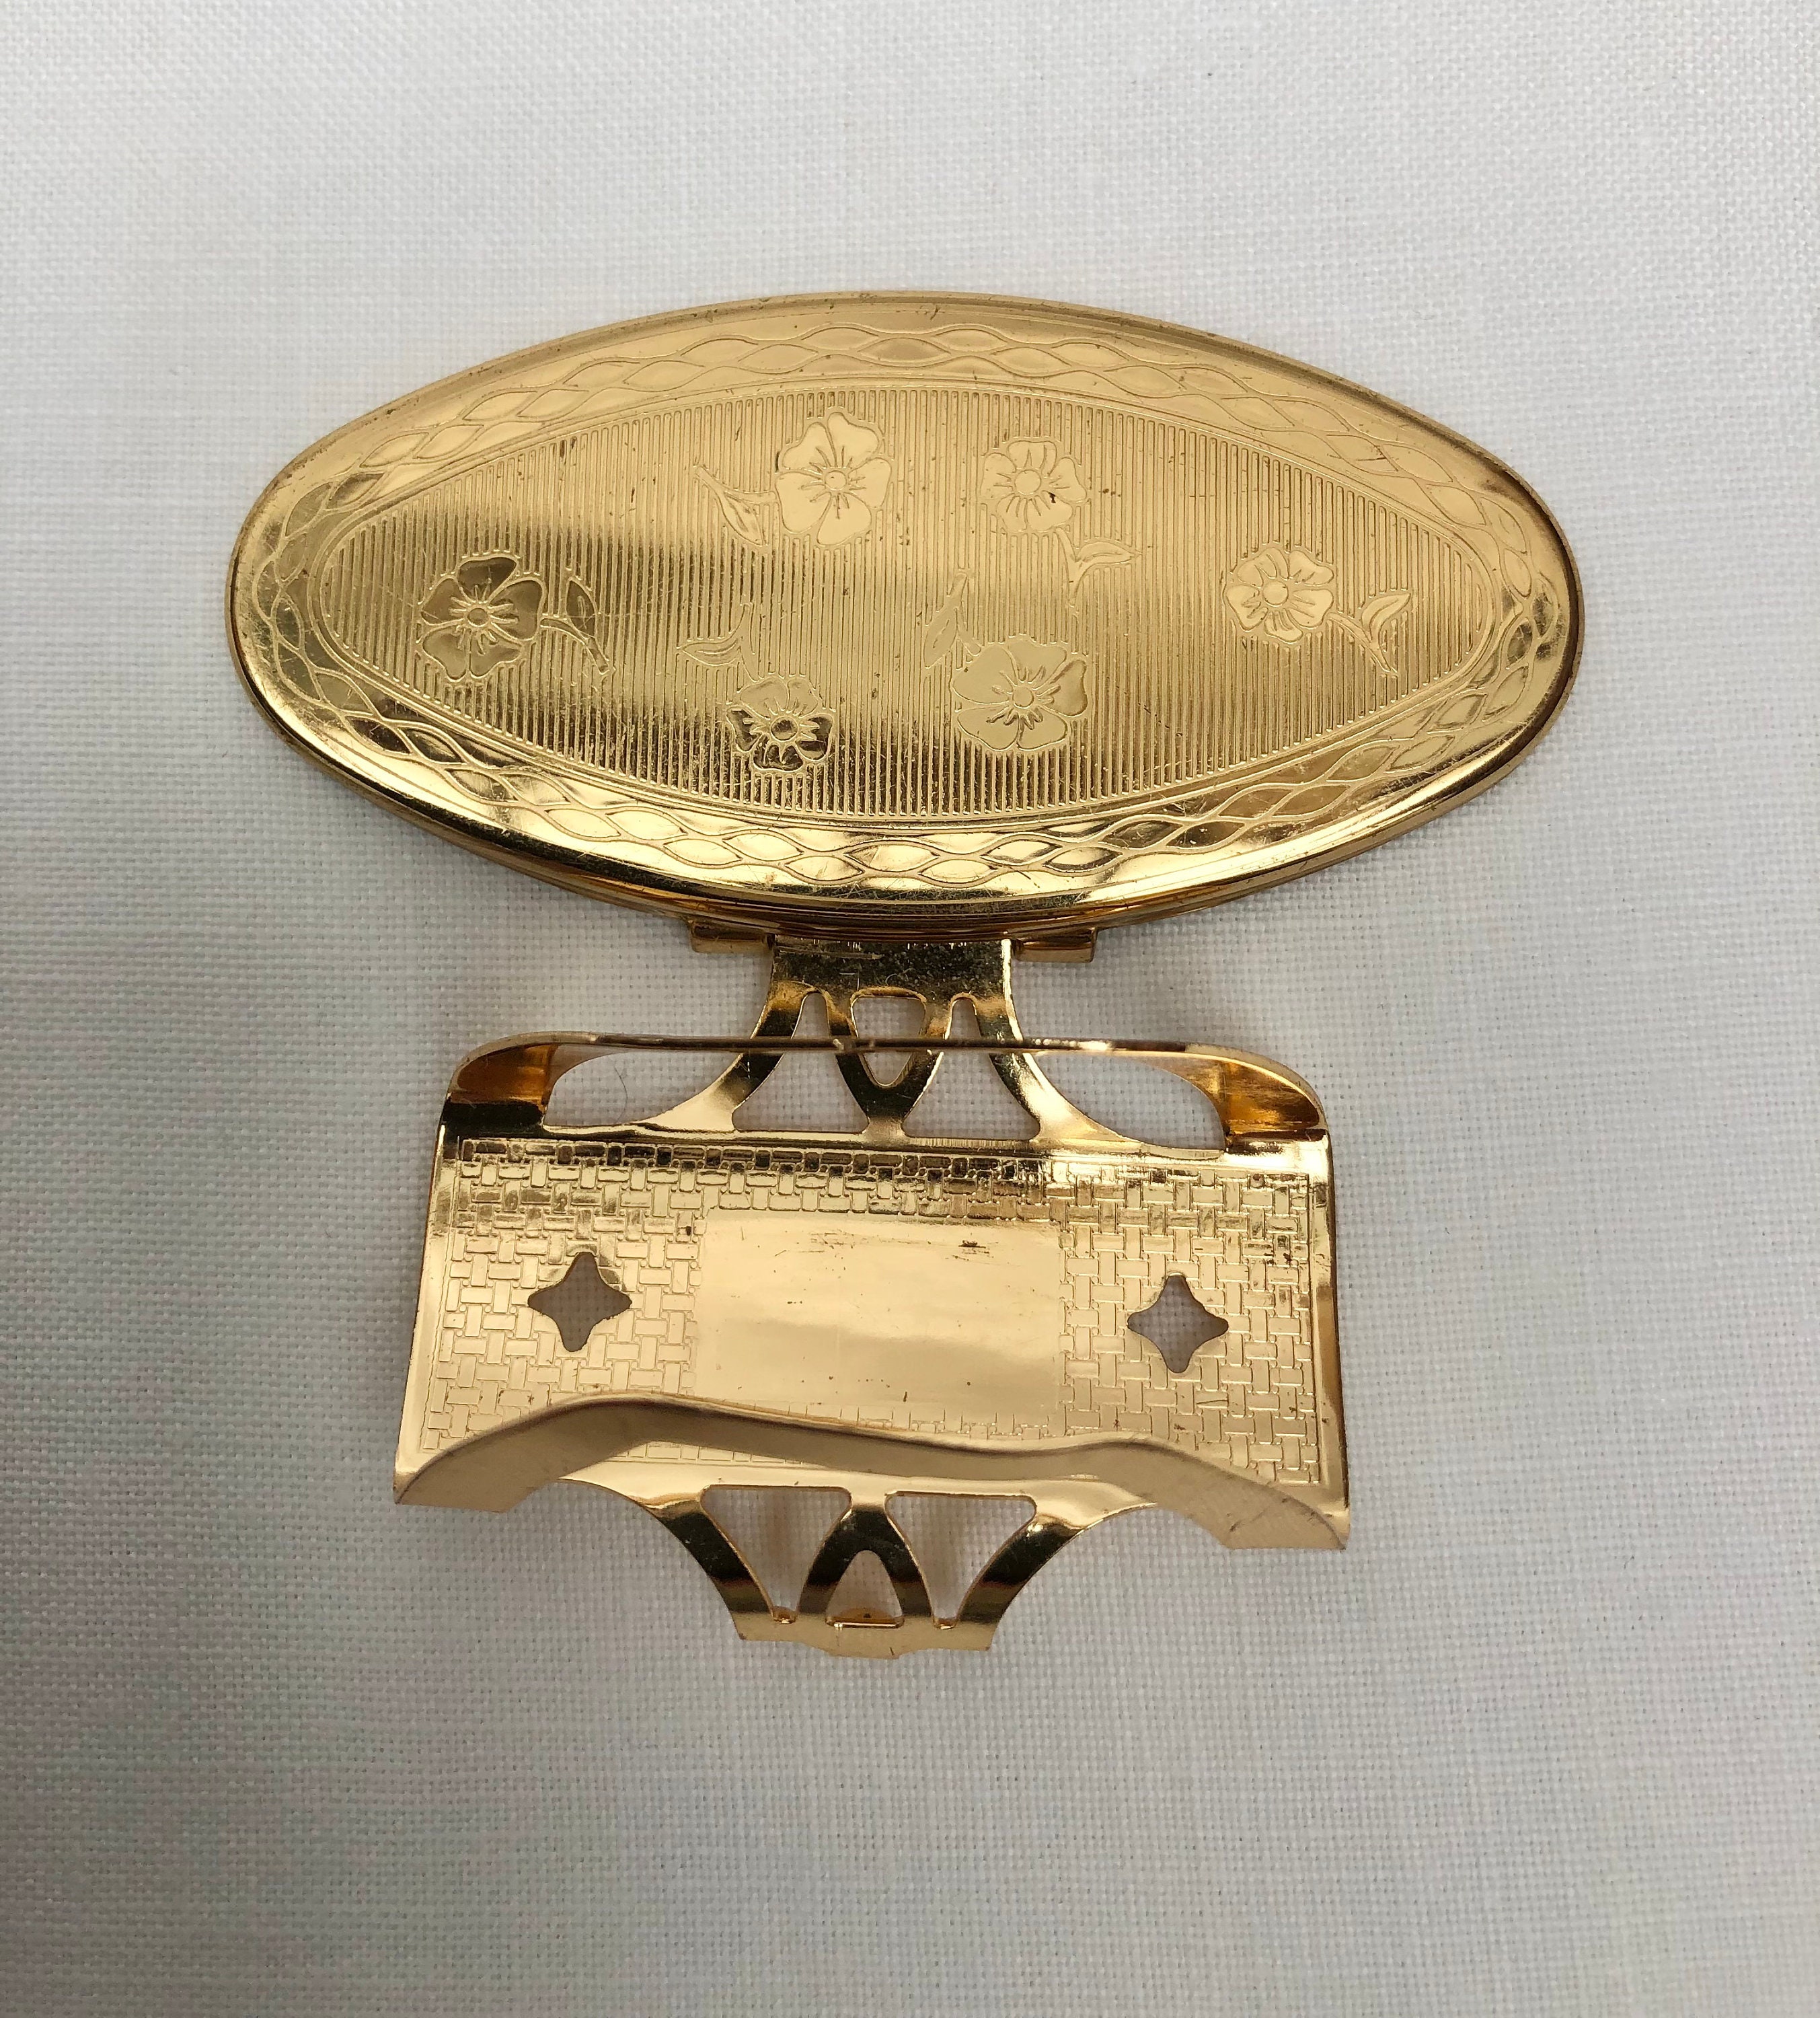 File:Vintage Lipstick Holder Mirror By Stratton, Made In England